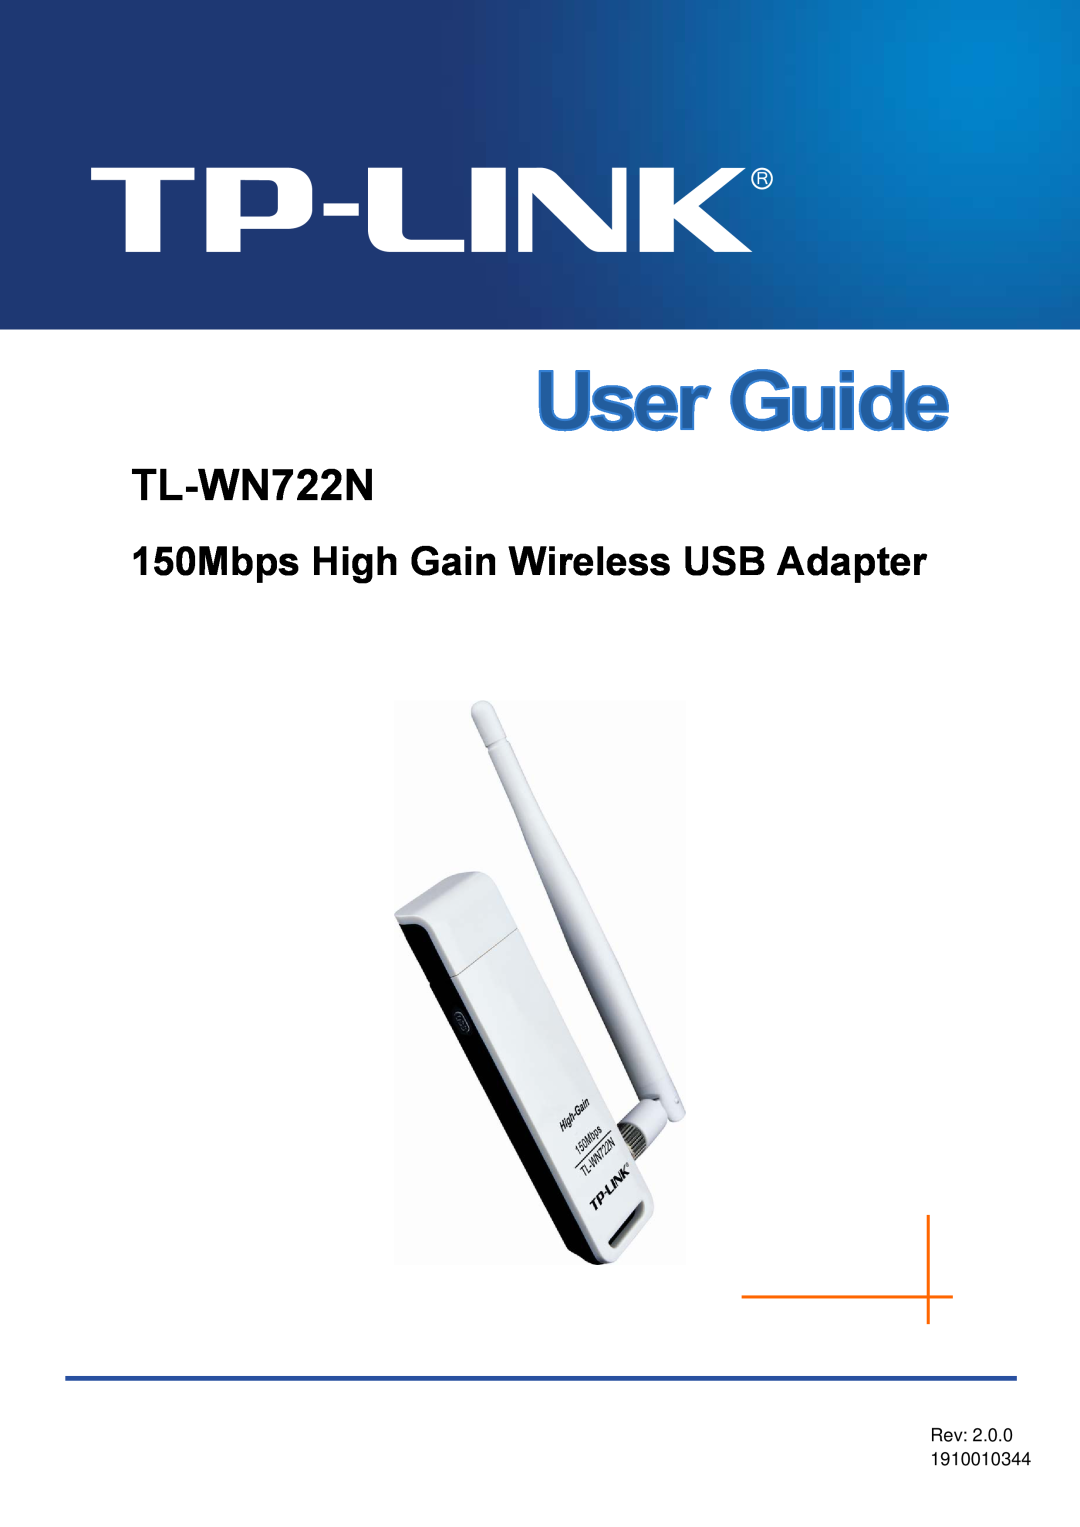 TP-Link manual Hardware Connection, Method Two, MODEL NO. TL-WN821N/TL-WN721N/TL-WN722N, Package Contents, Method One 